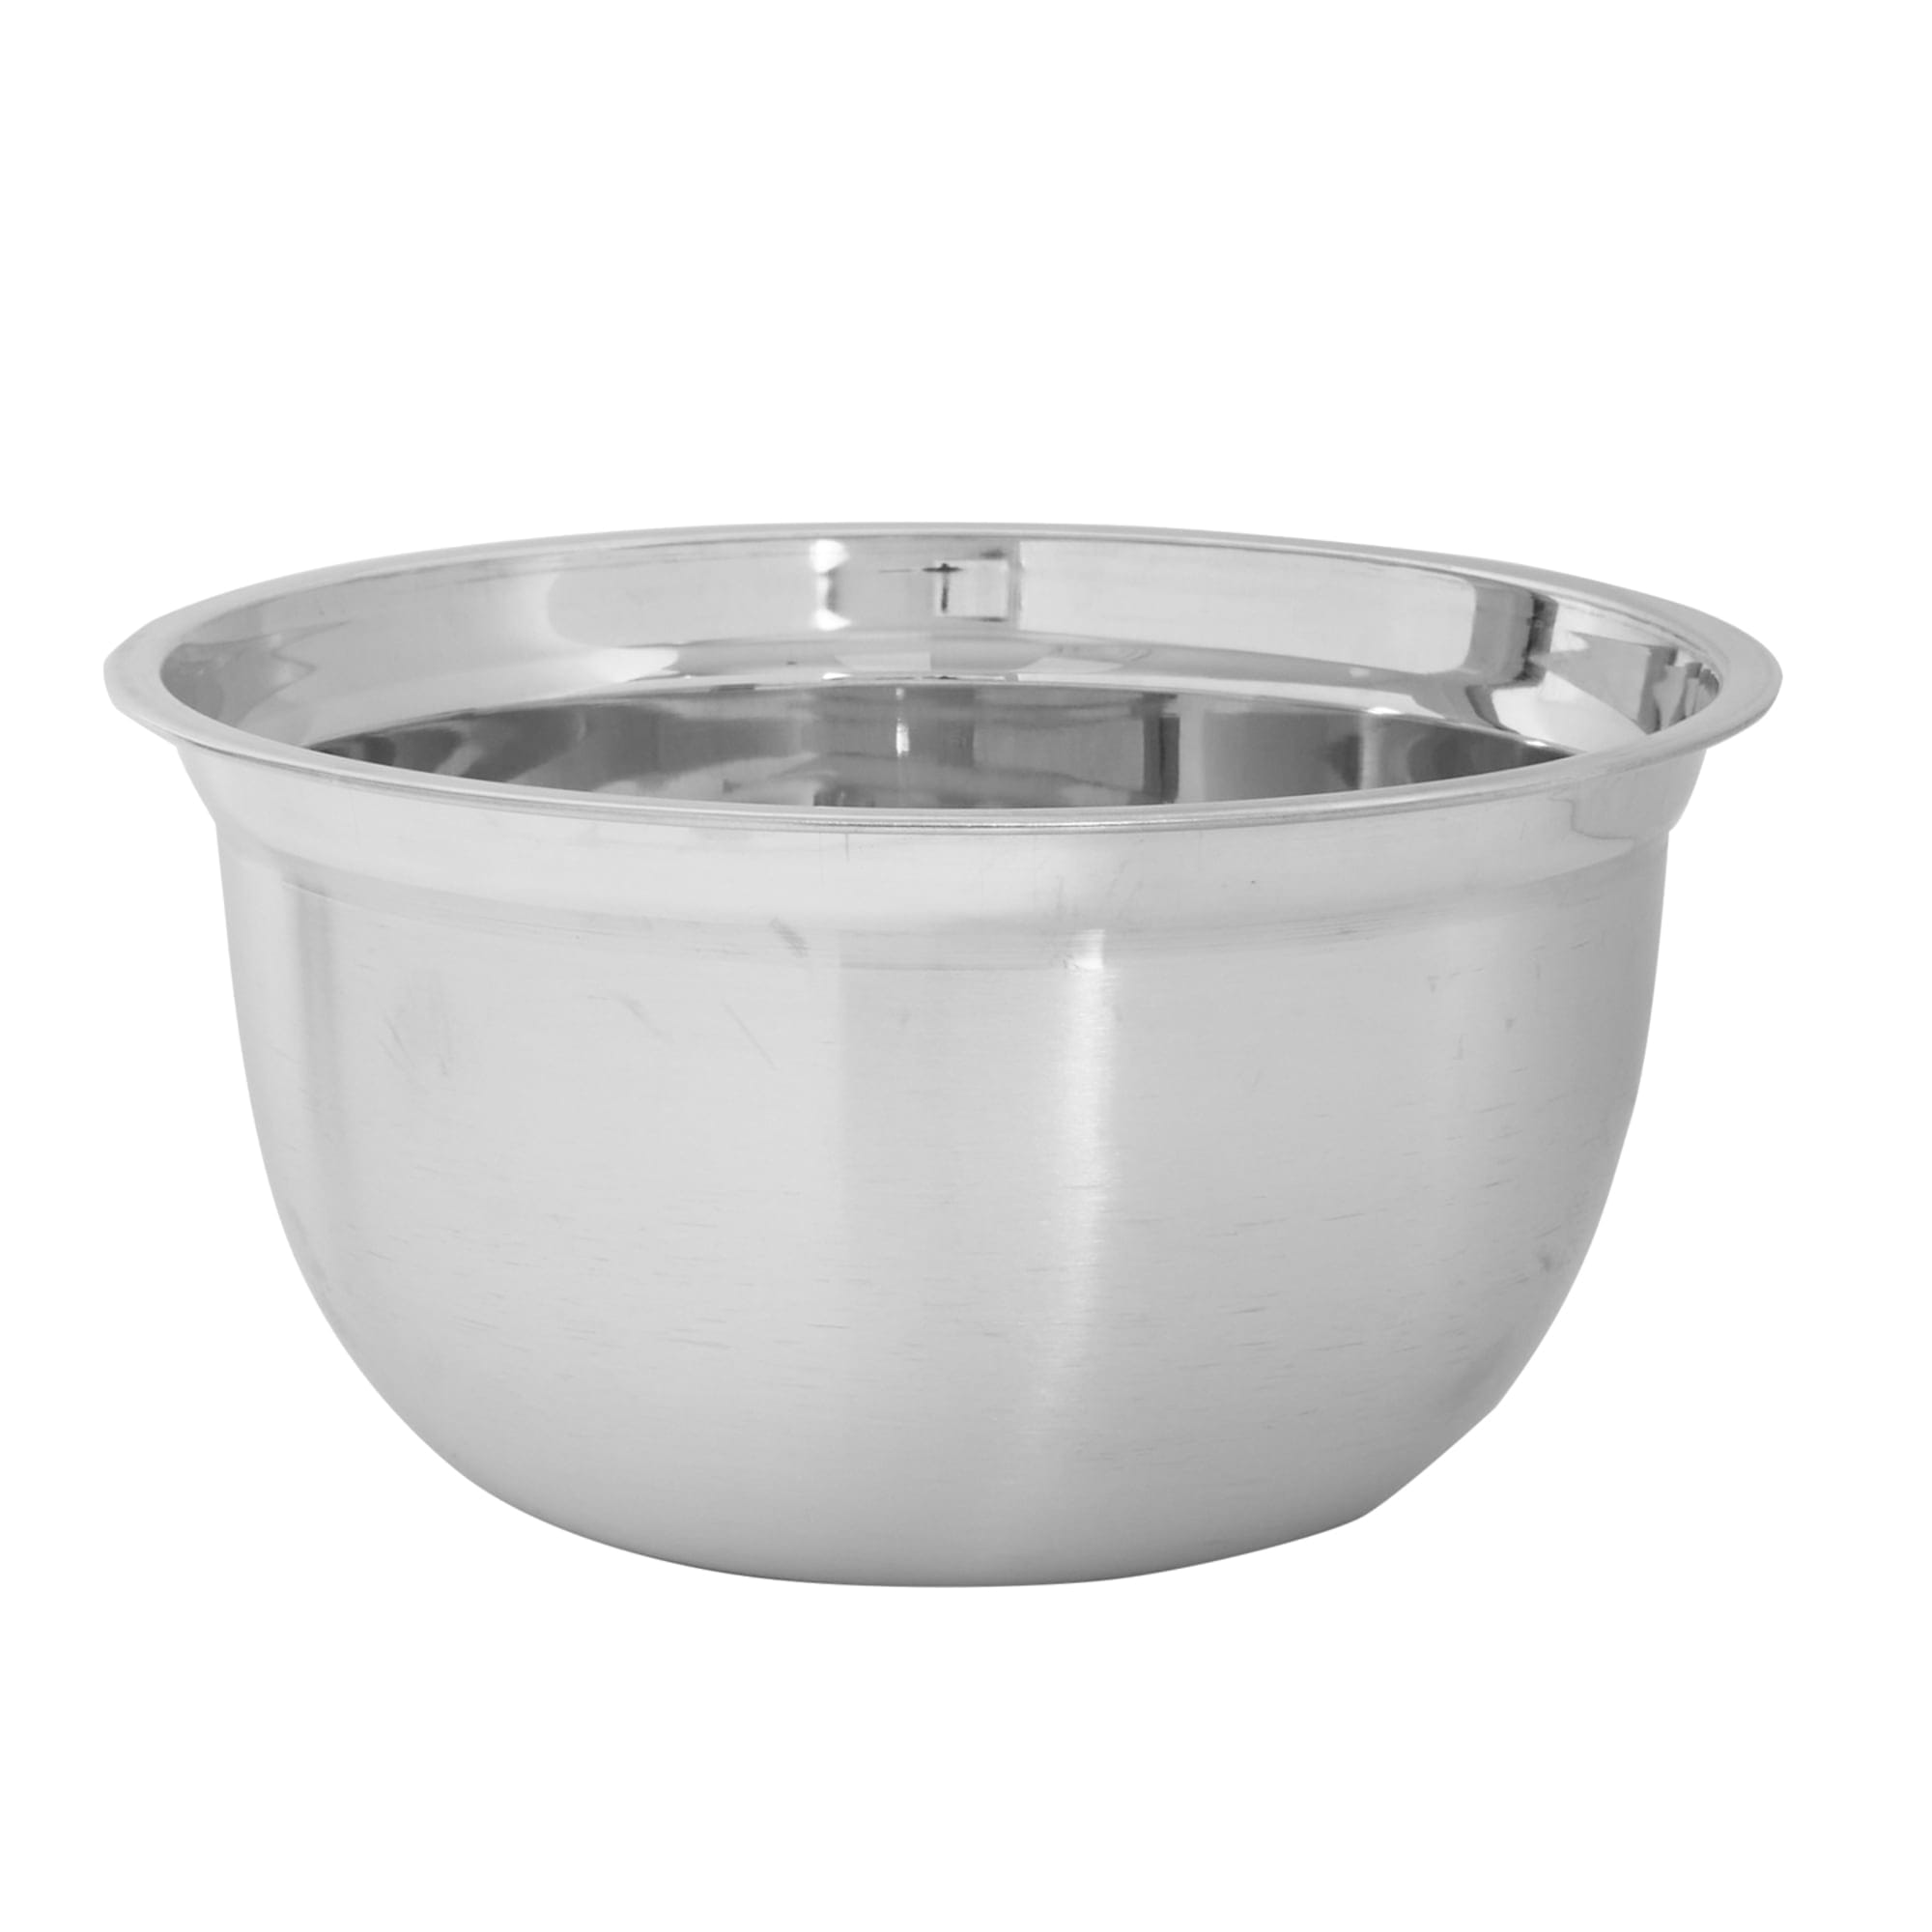 Home Basics 5 QT Stainless Steel Beveled Anti-Skid Mixing Bowl, Silver $5.00 EACH, CASE PACK OF 24